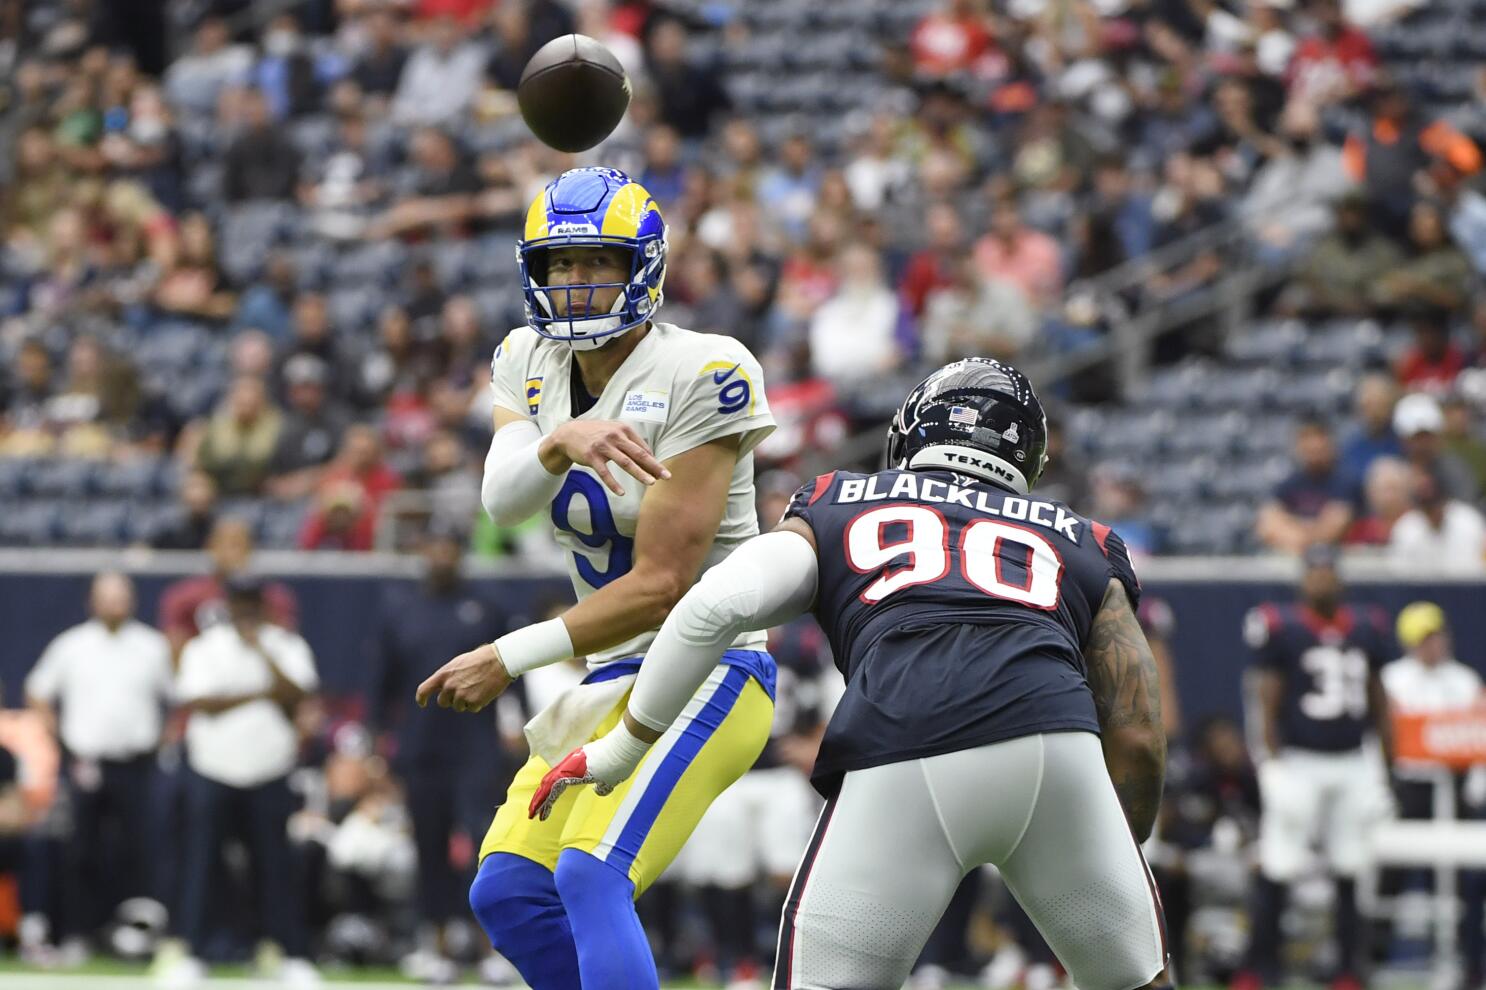 Stafford has 3 TD passes as Rams roll past Texans 38-22 - The San